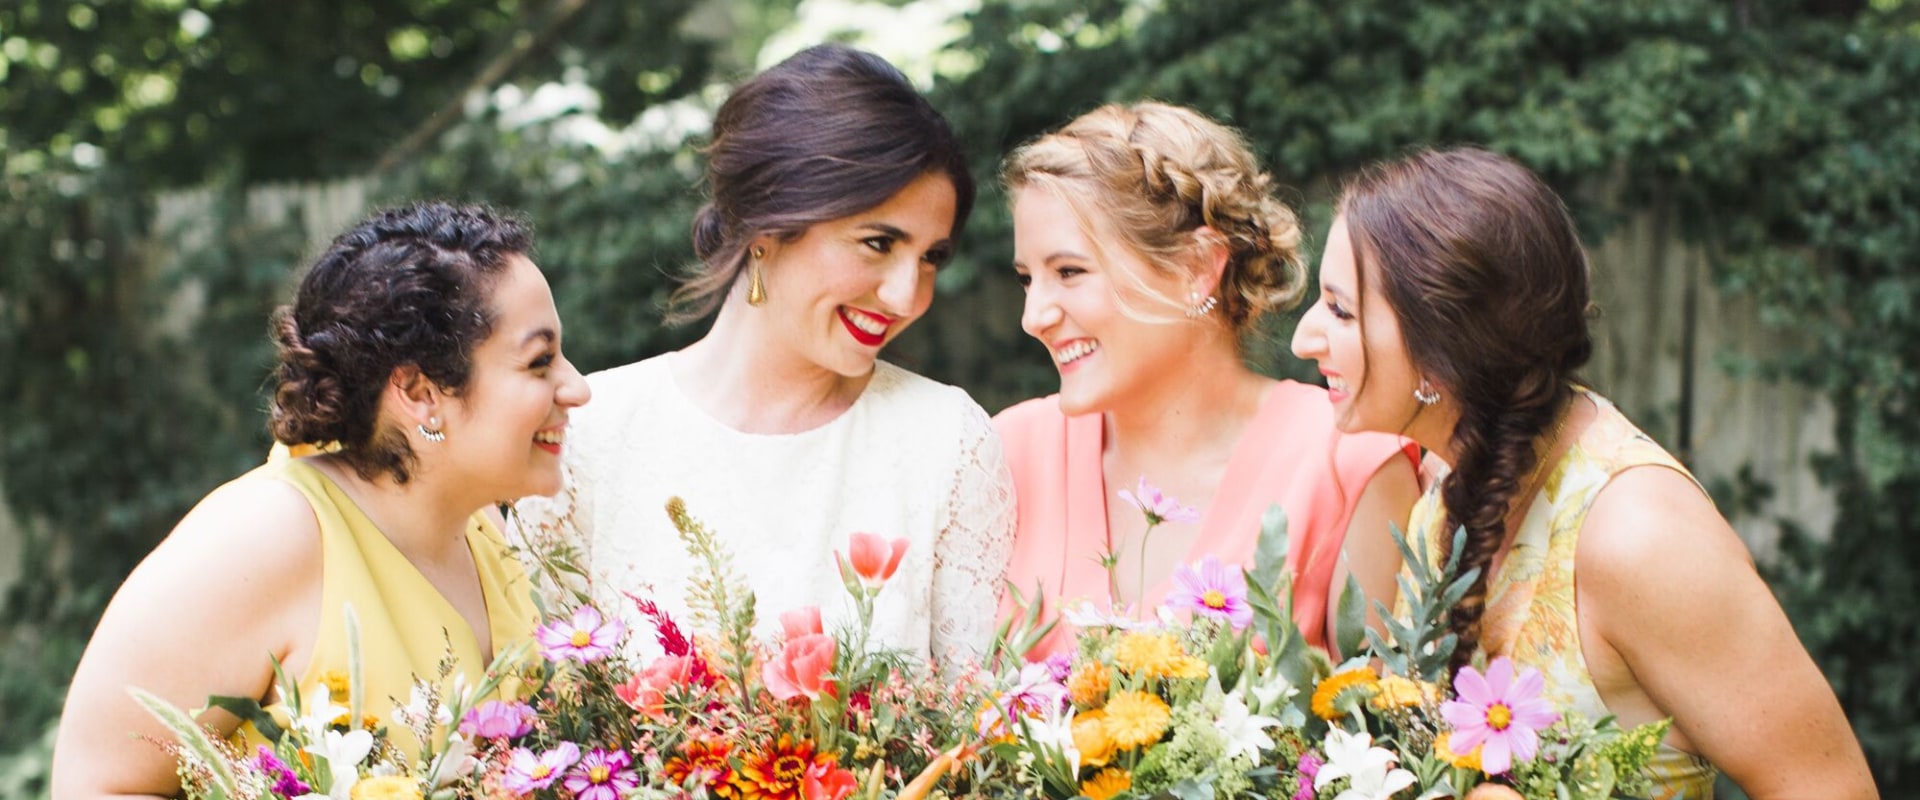 Who Pays for the Bridesmaids Dresses in a Wedding?